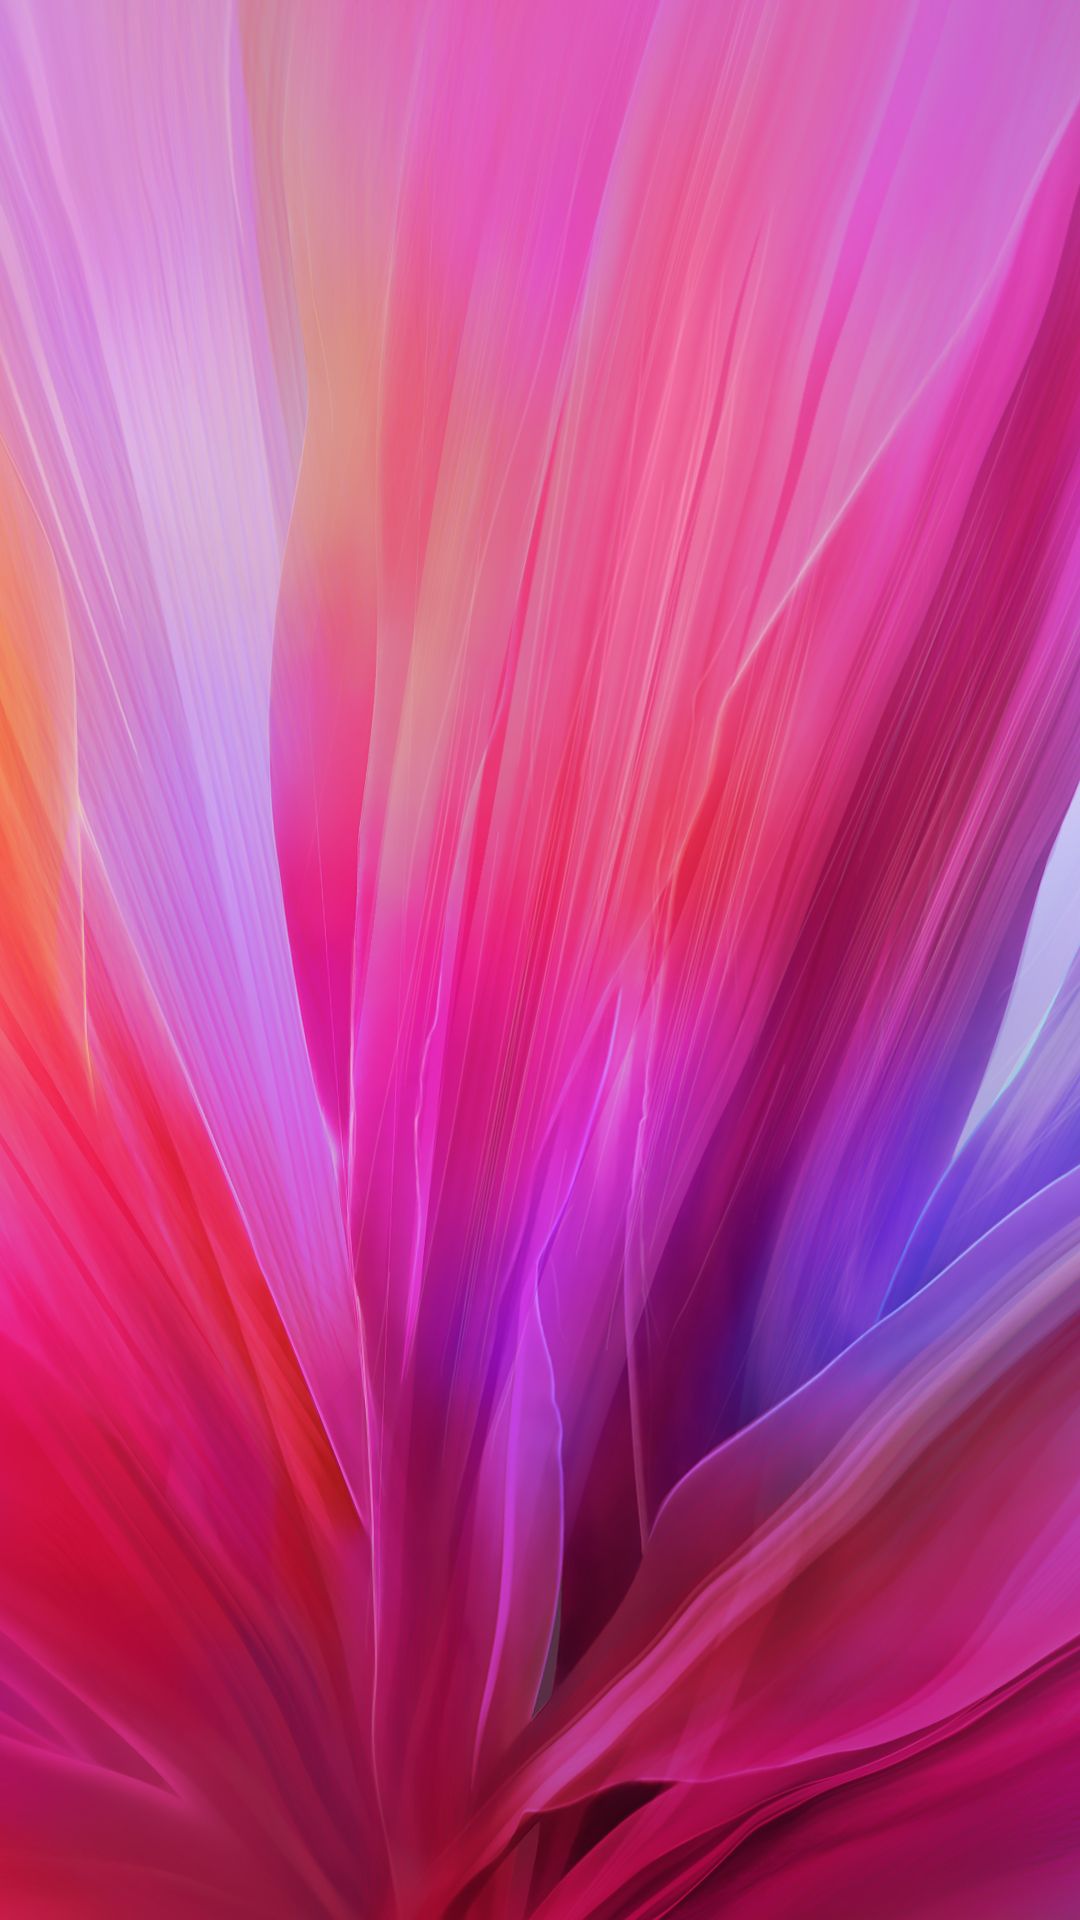 Free Download Sony Xperia Z5 Wallpaper With Abstract Colorful Background Hq 1080x19 For Your Desktop Mobile Tablet Explore 57 Xperia Backgrounds Xperia Backgrounds Xperia Wallpaper Xperia Wallpapers